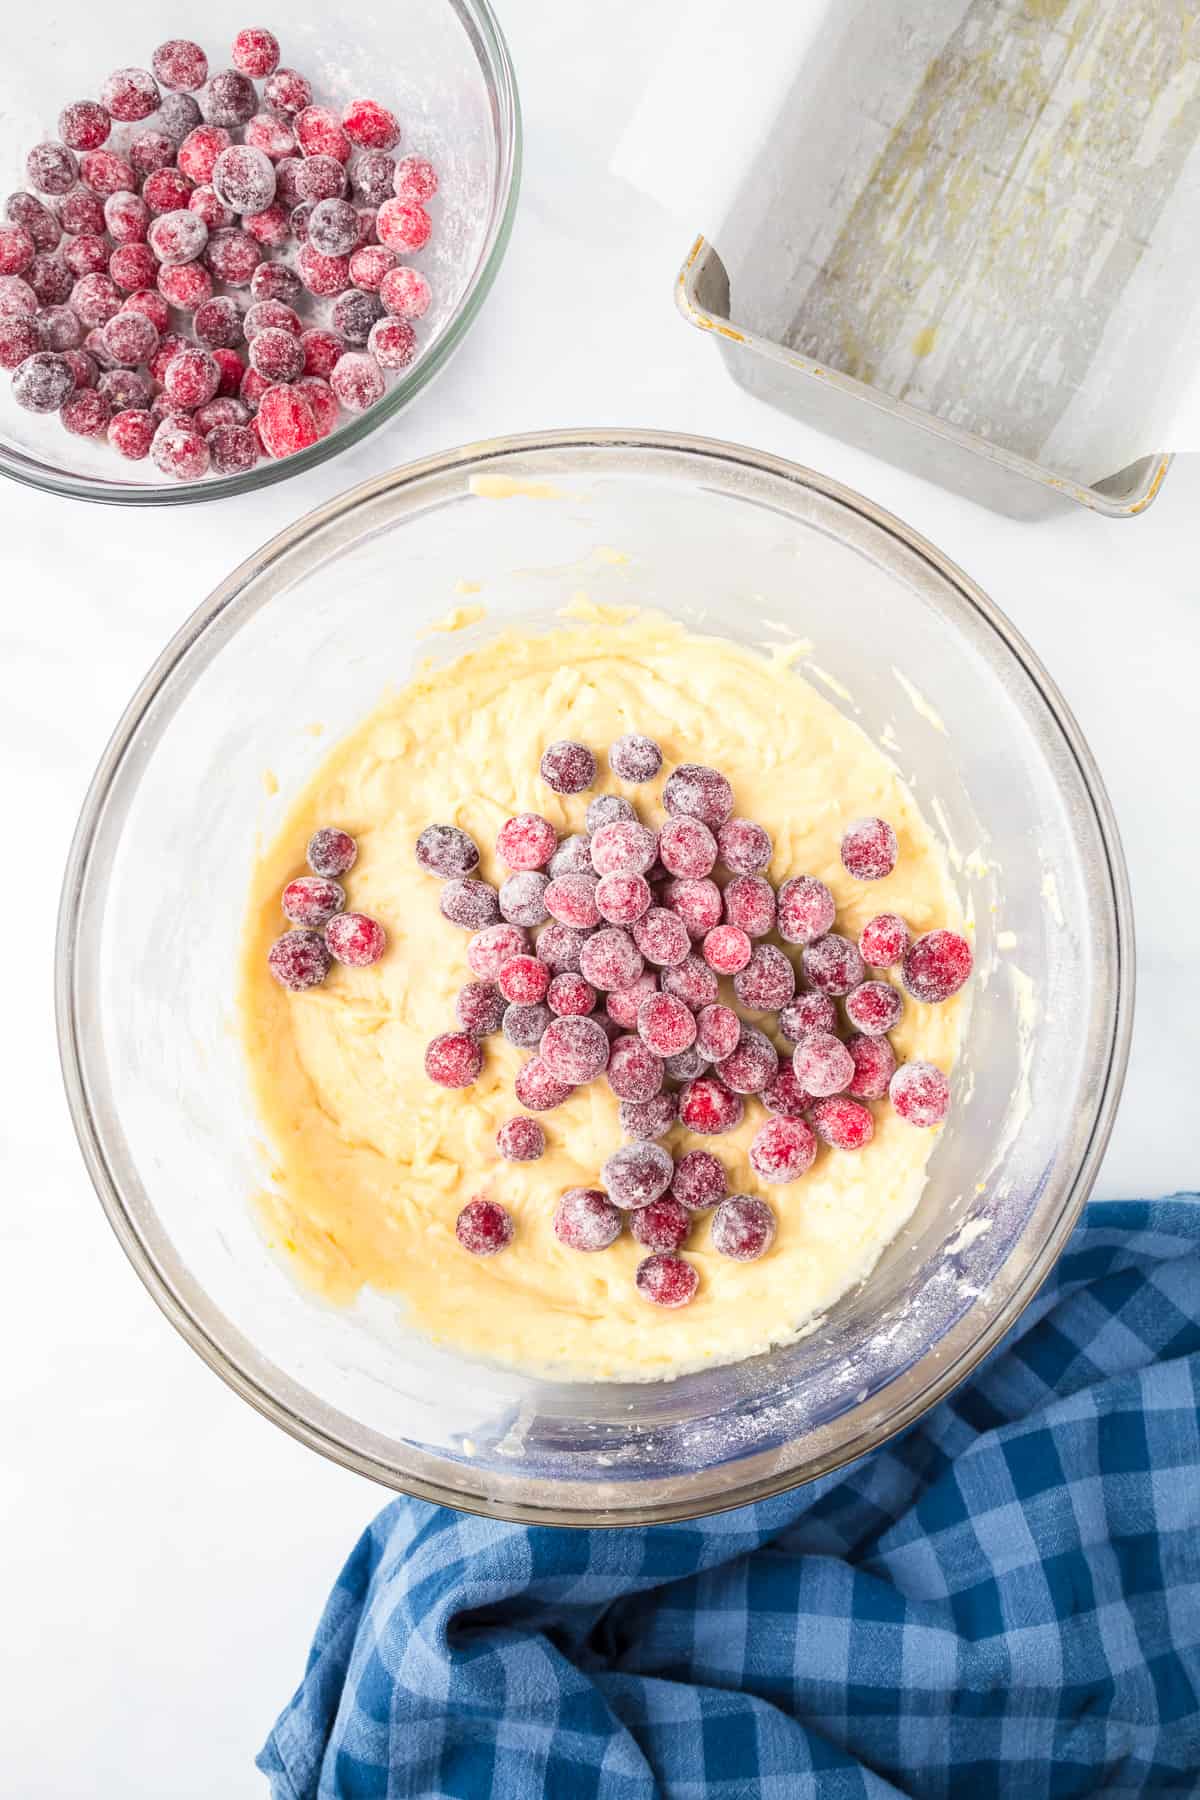 Cranberries being folded into an orange cake batter in a bowl from above on a counter.